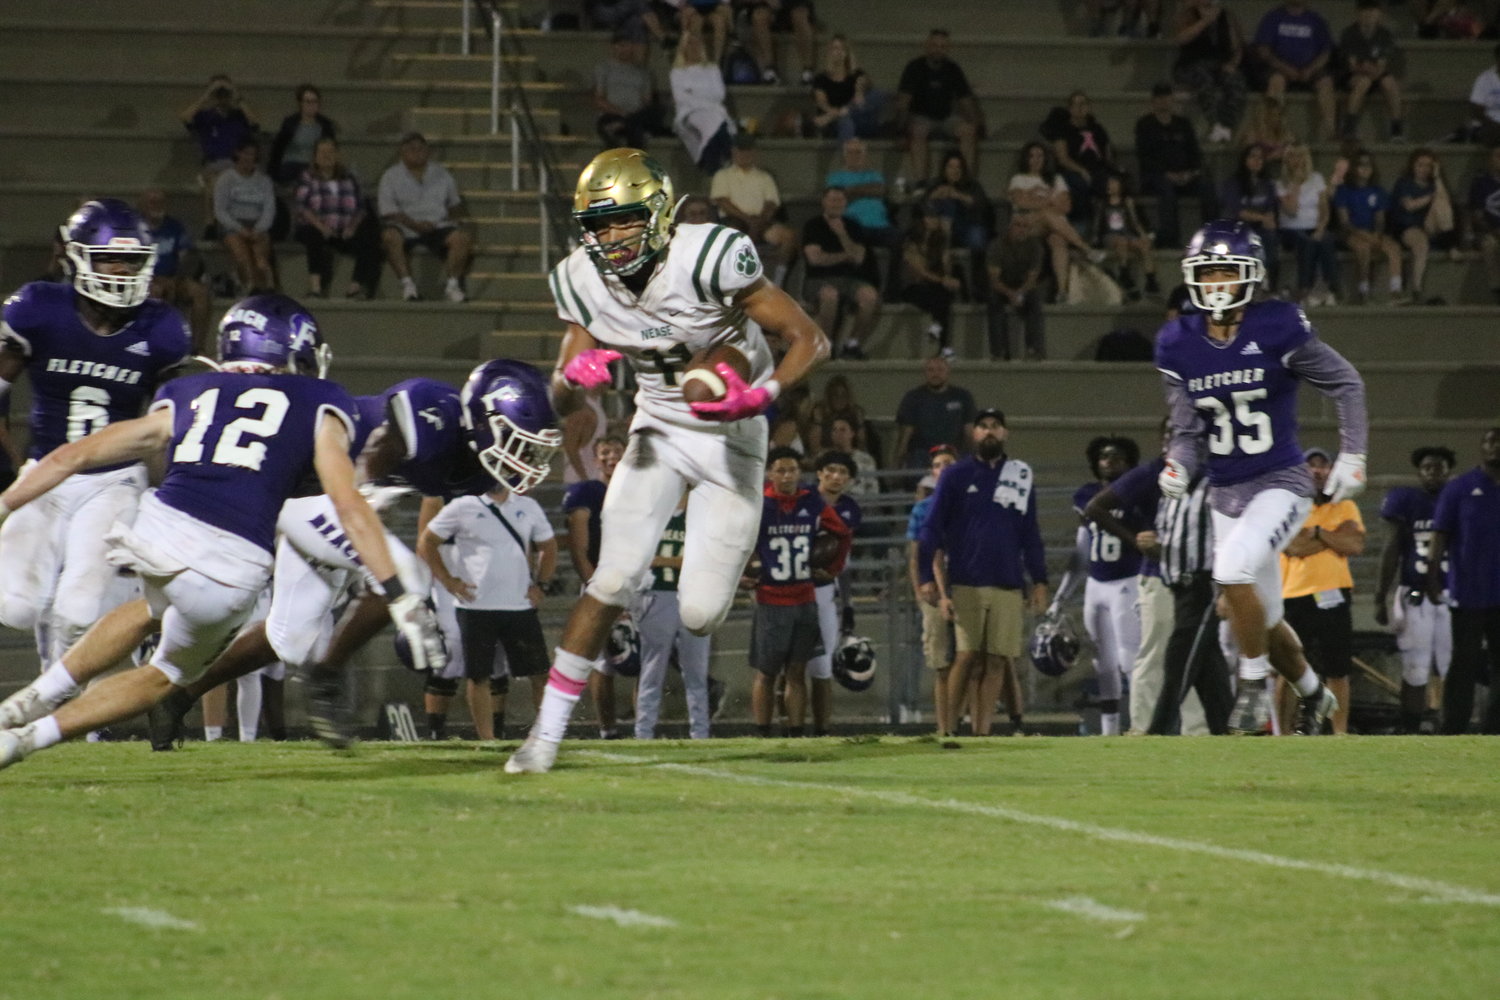 Donavan Wilson looks for yards after a reception against Fletcher Oct. 15. He and the Nease offense will look to rediscover their groove during the bye week.